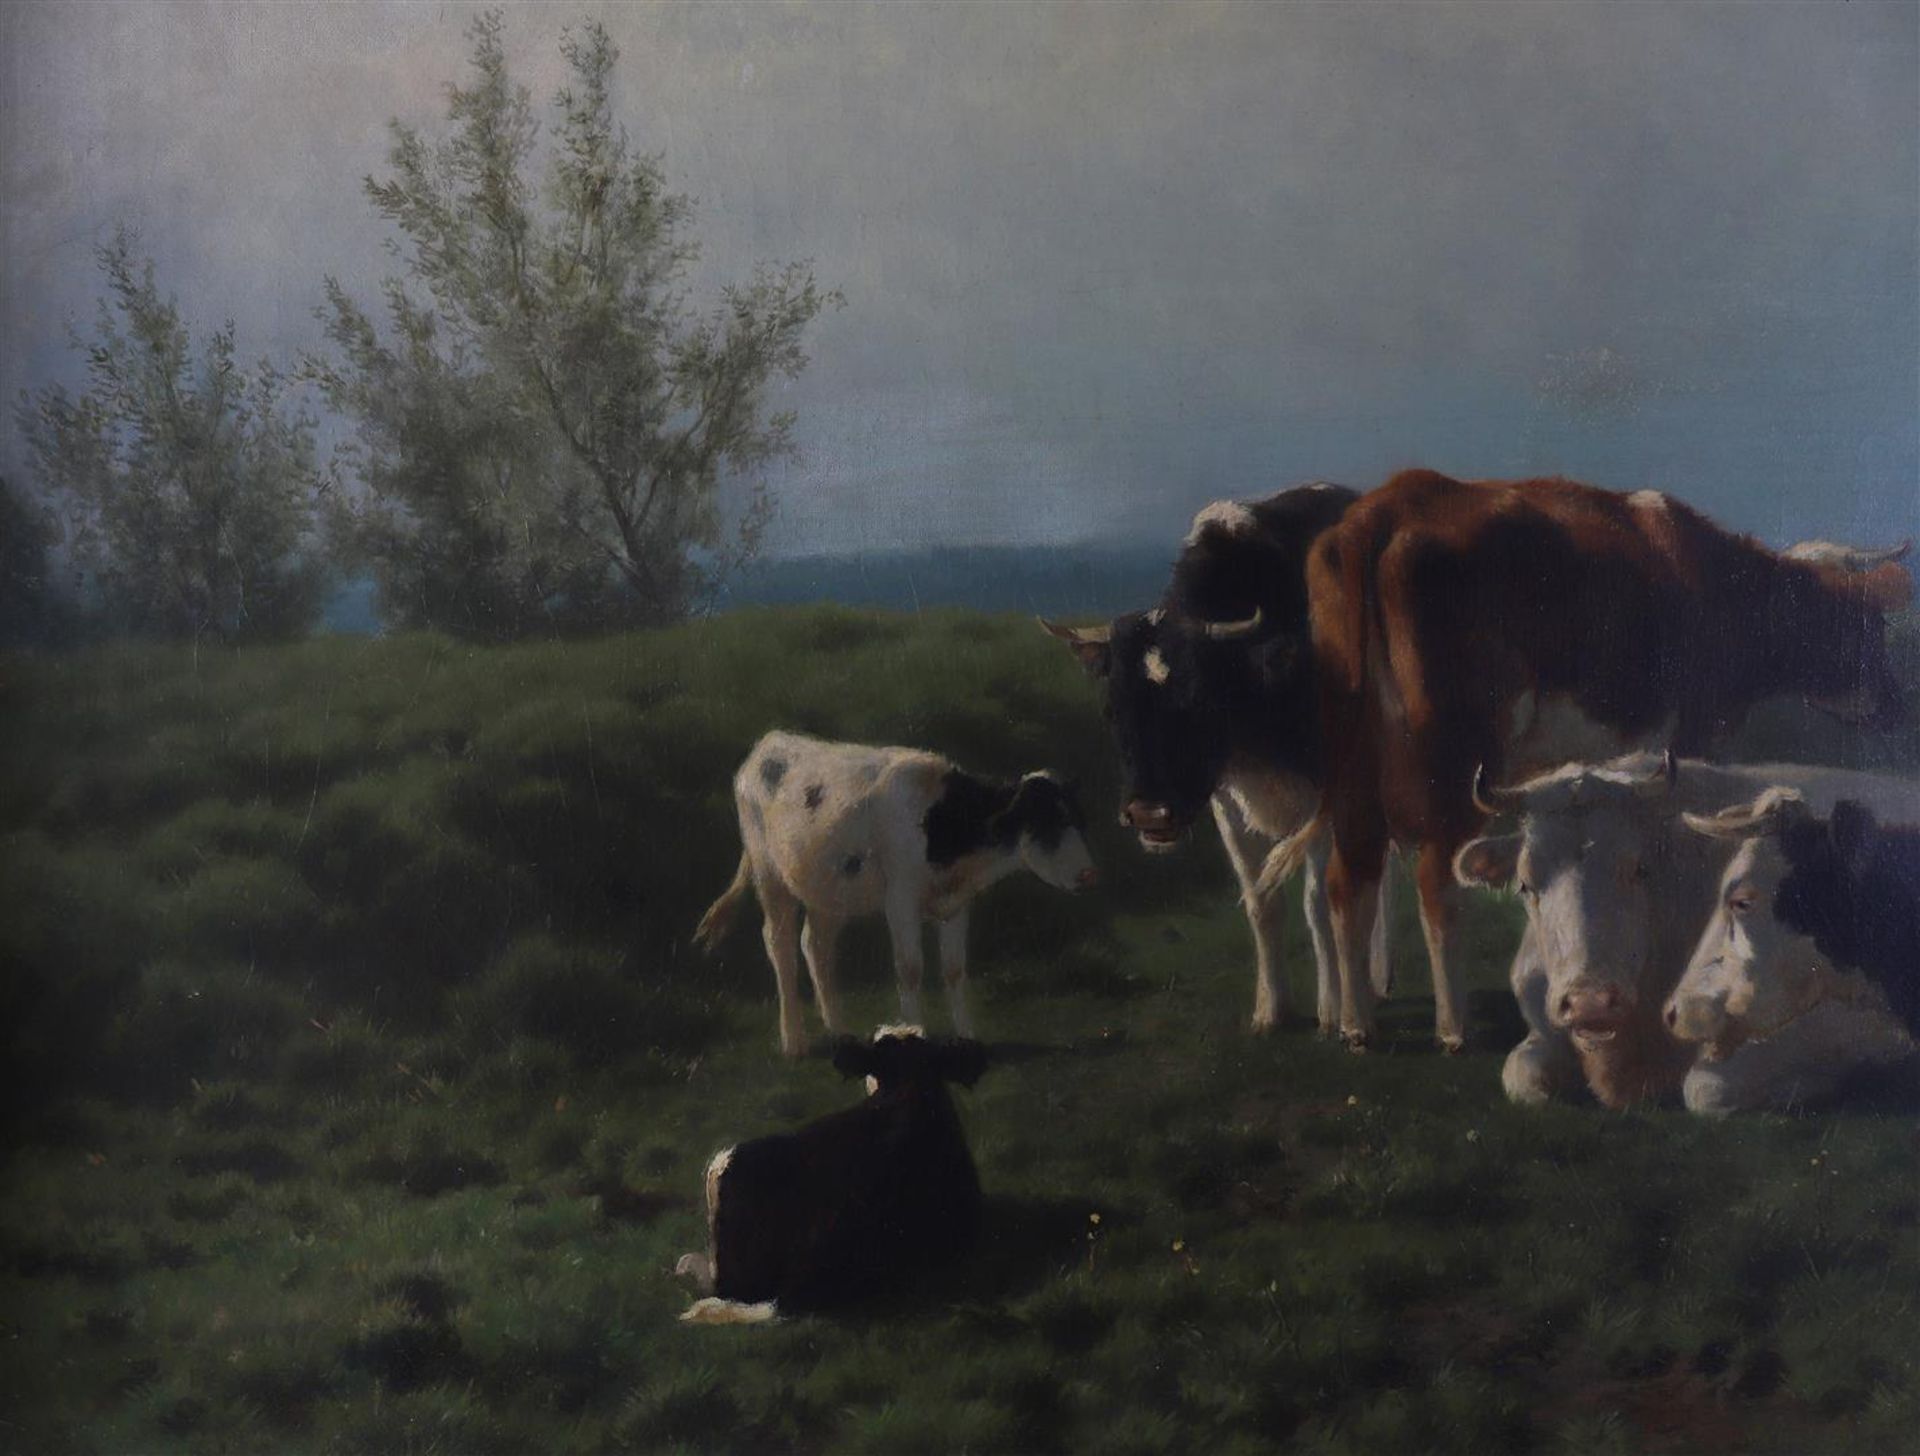 Mauve, Anthonie sr (Zaandam 1838-1888) "Cows and milkmaid in a landscape with pollard willows", - Image 11 of 18